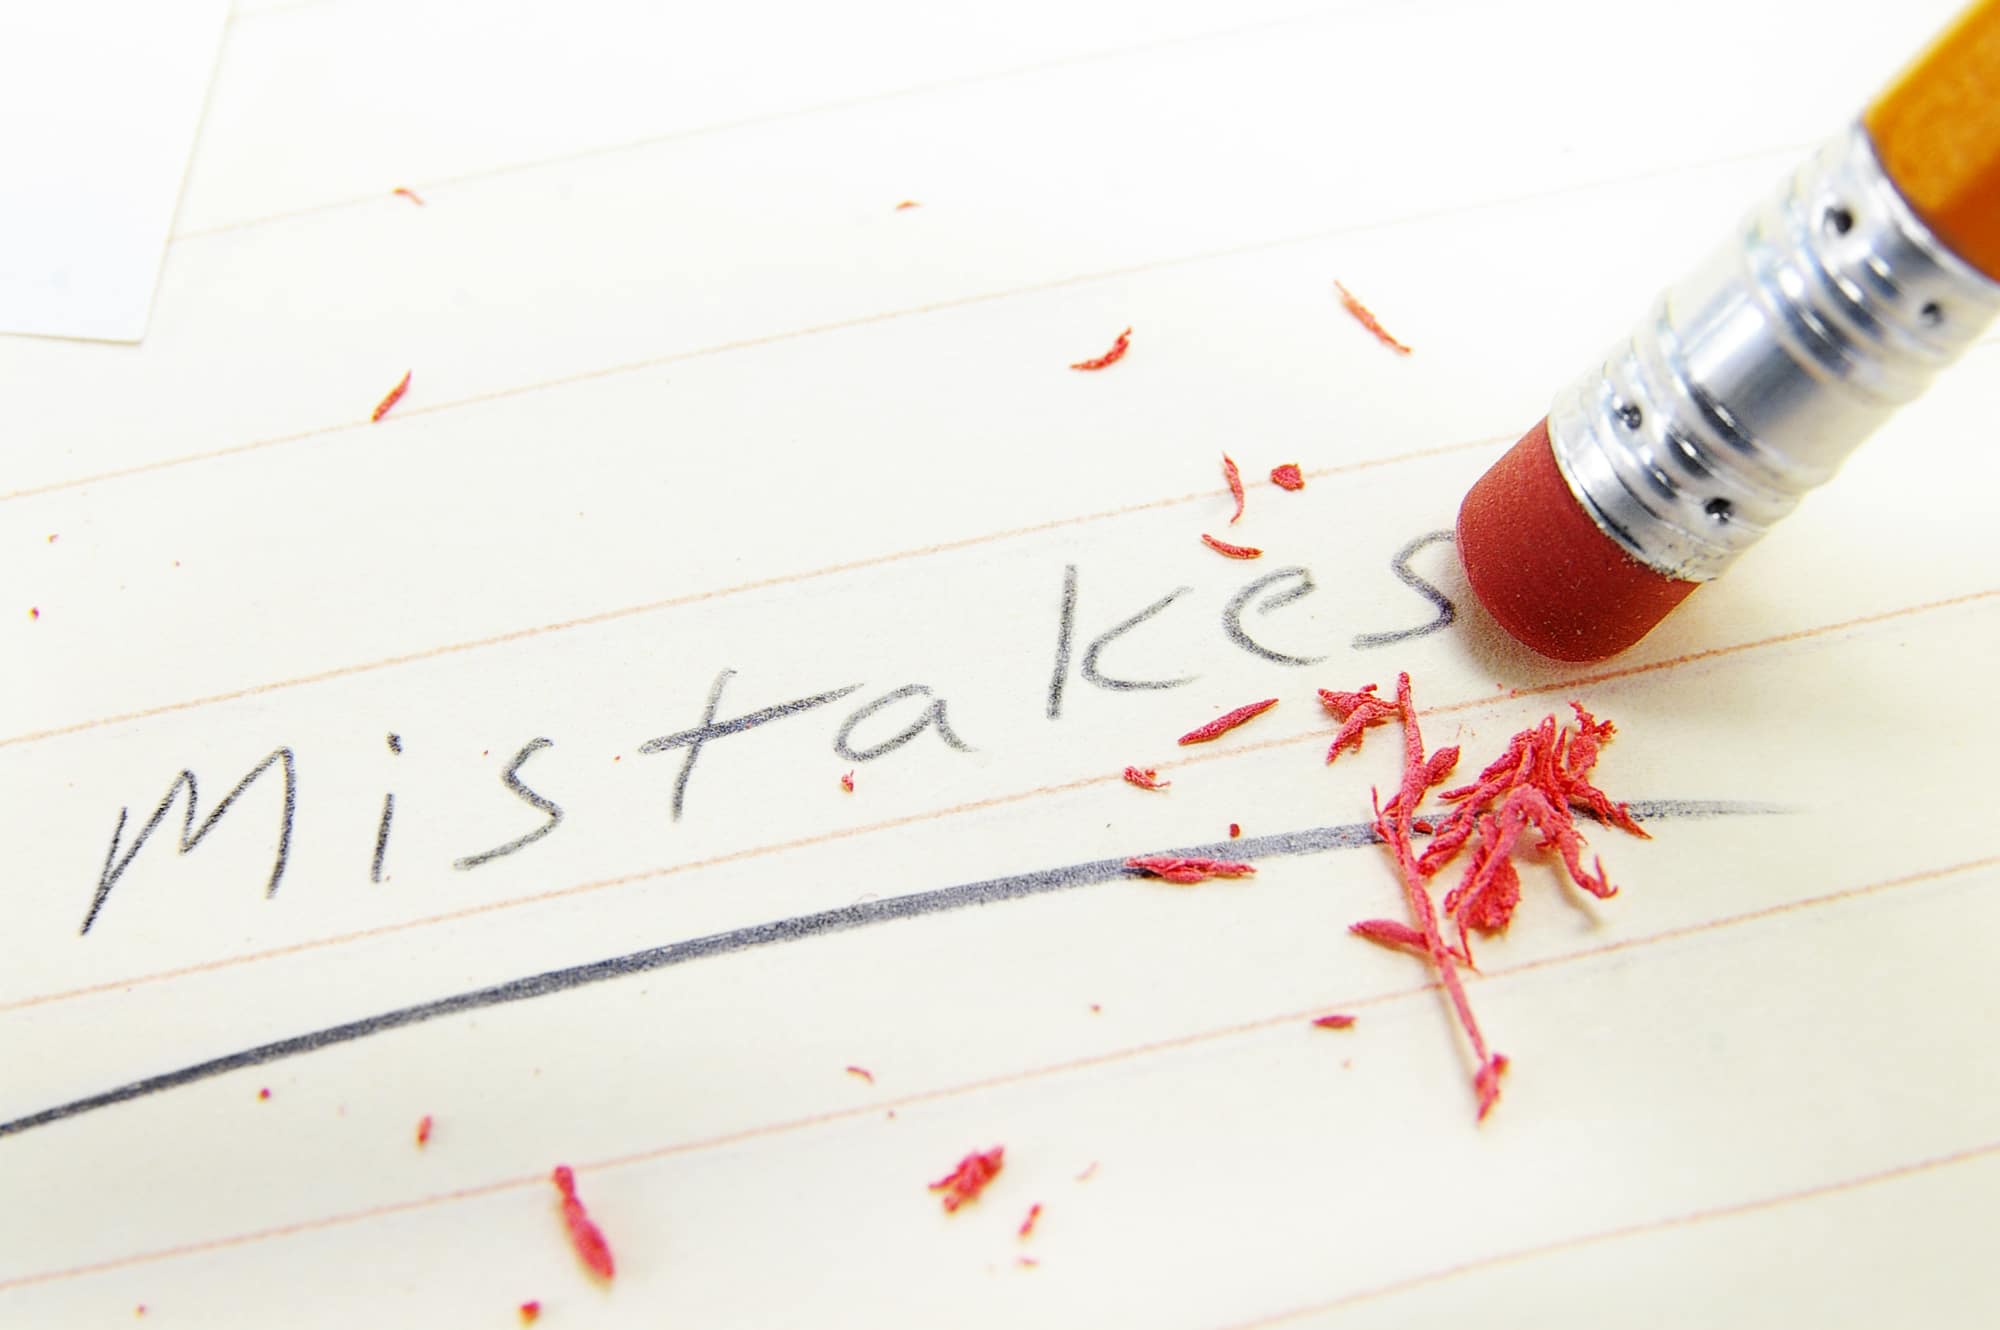 What Are the Top 3 Mistakes Entrepreneurs Make?